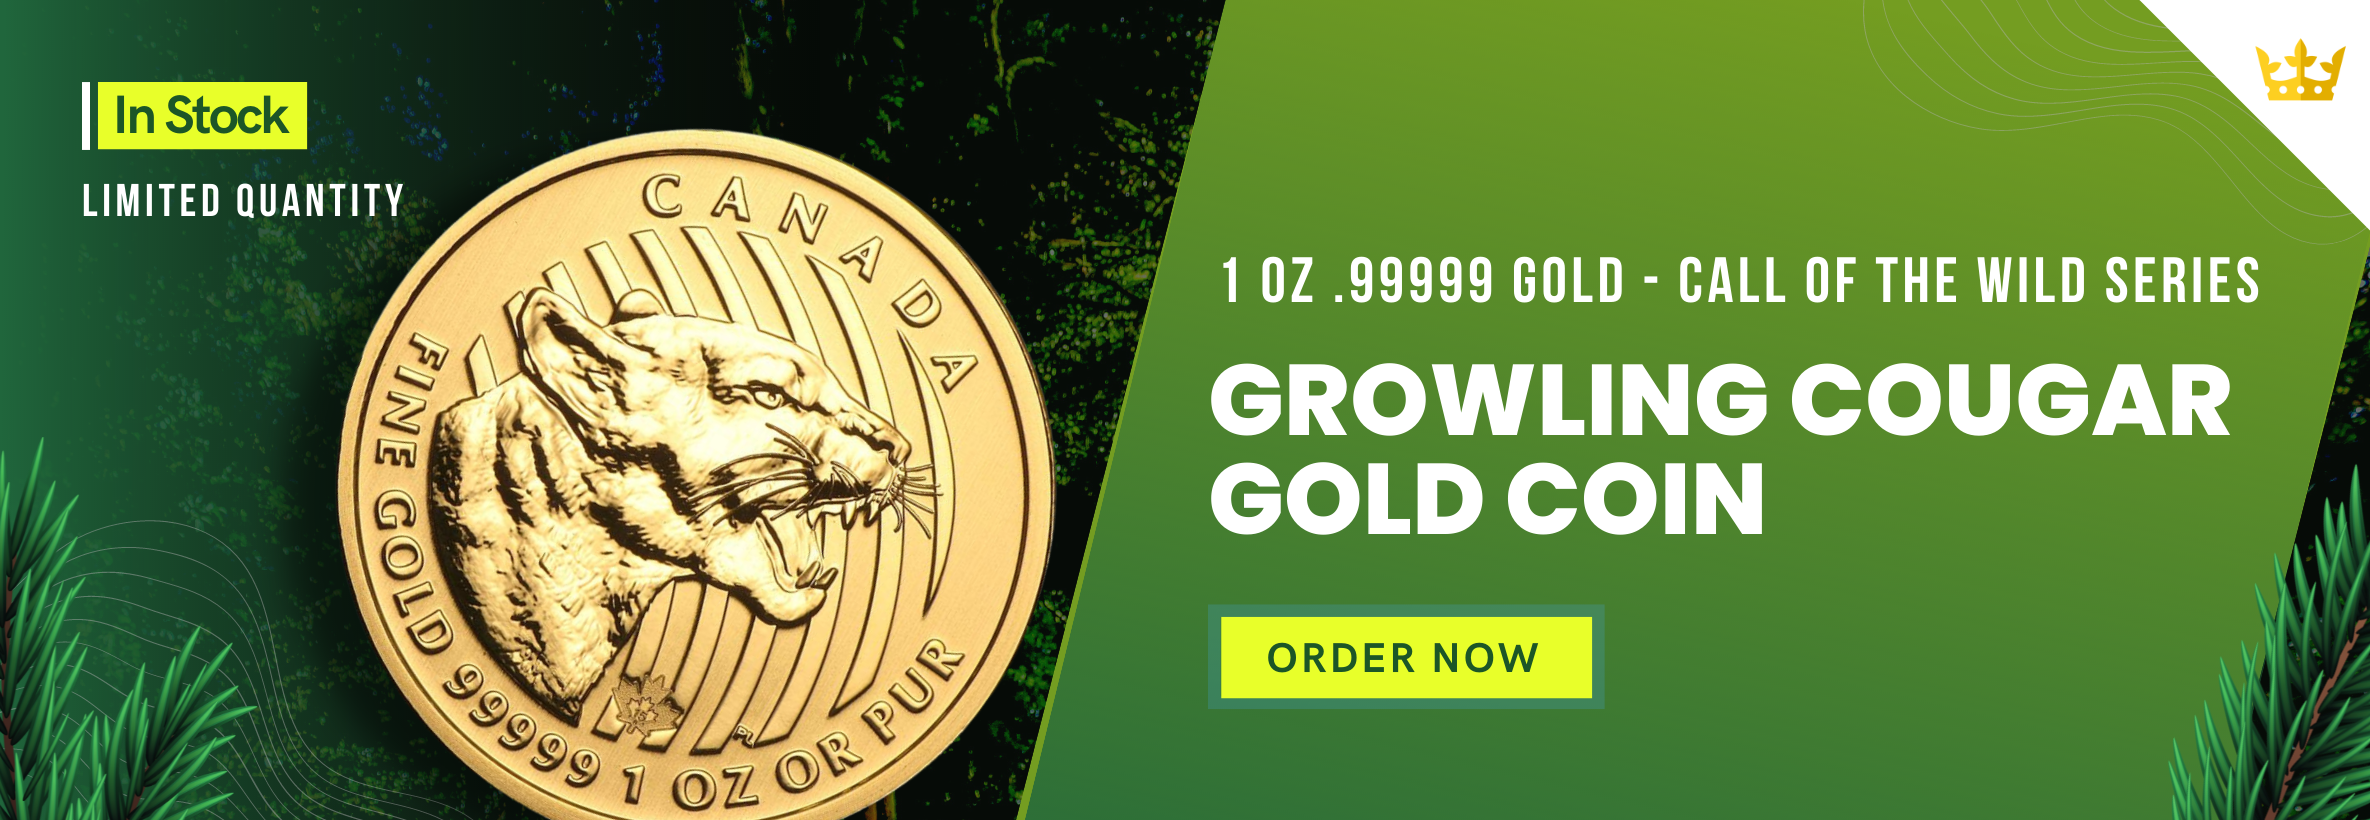 1 oz Gold Coin Call of the Wild Gold Cougar .99999 pure